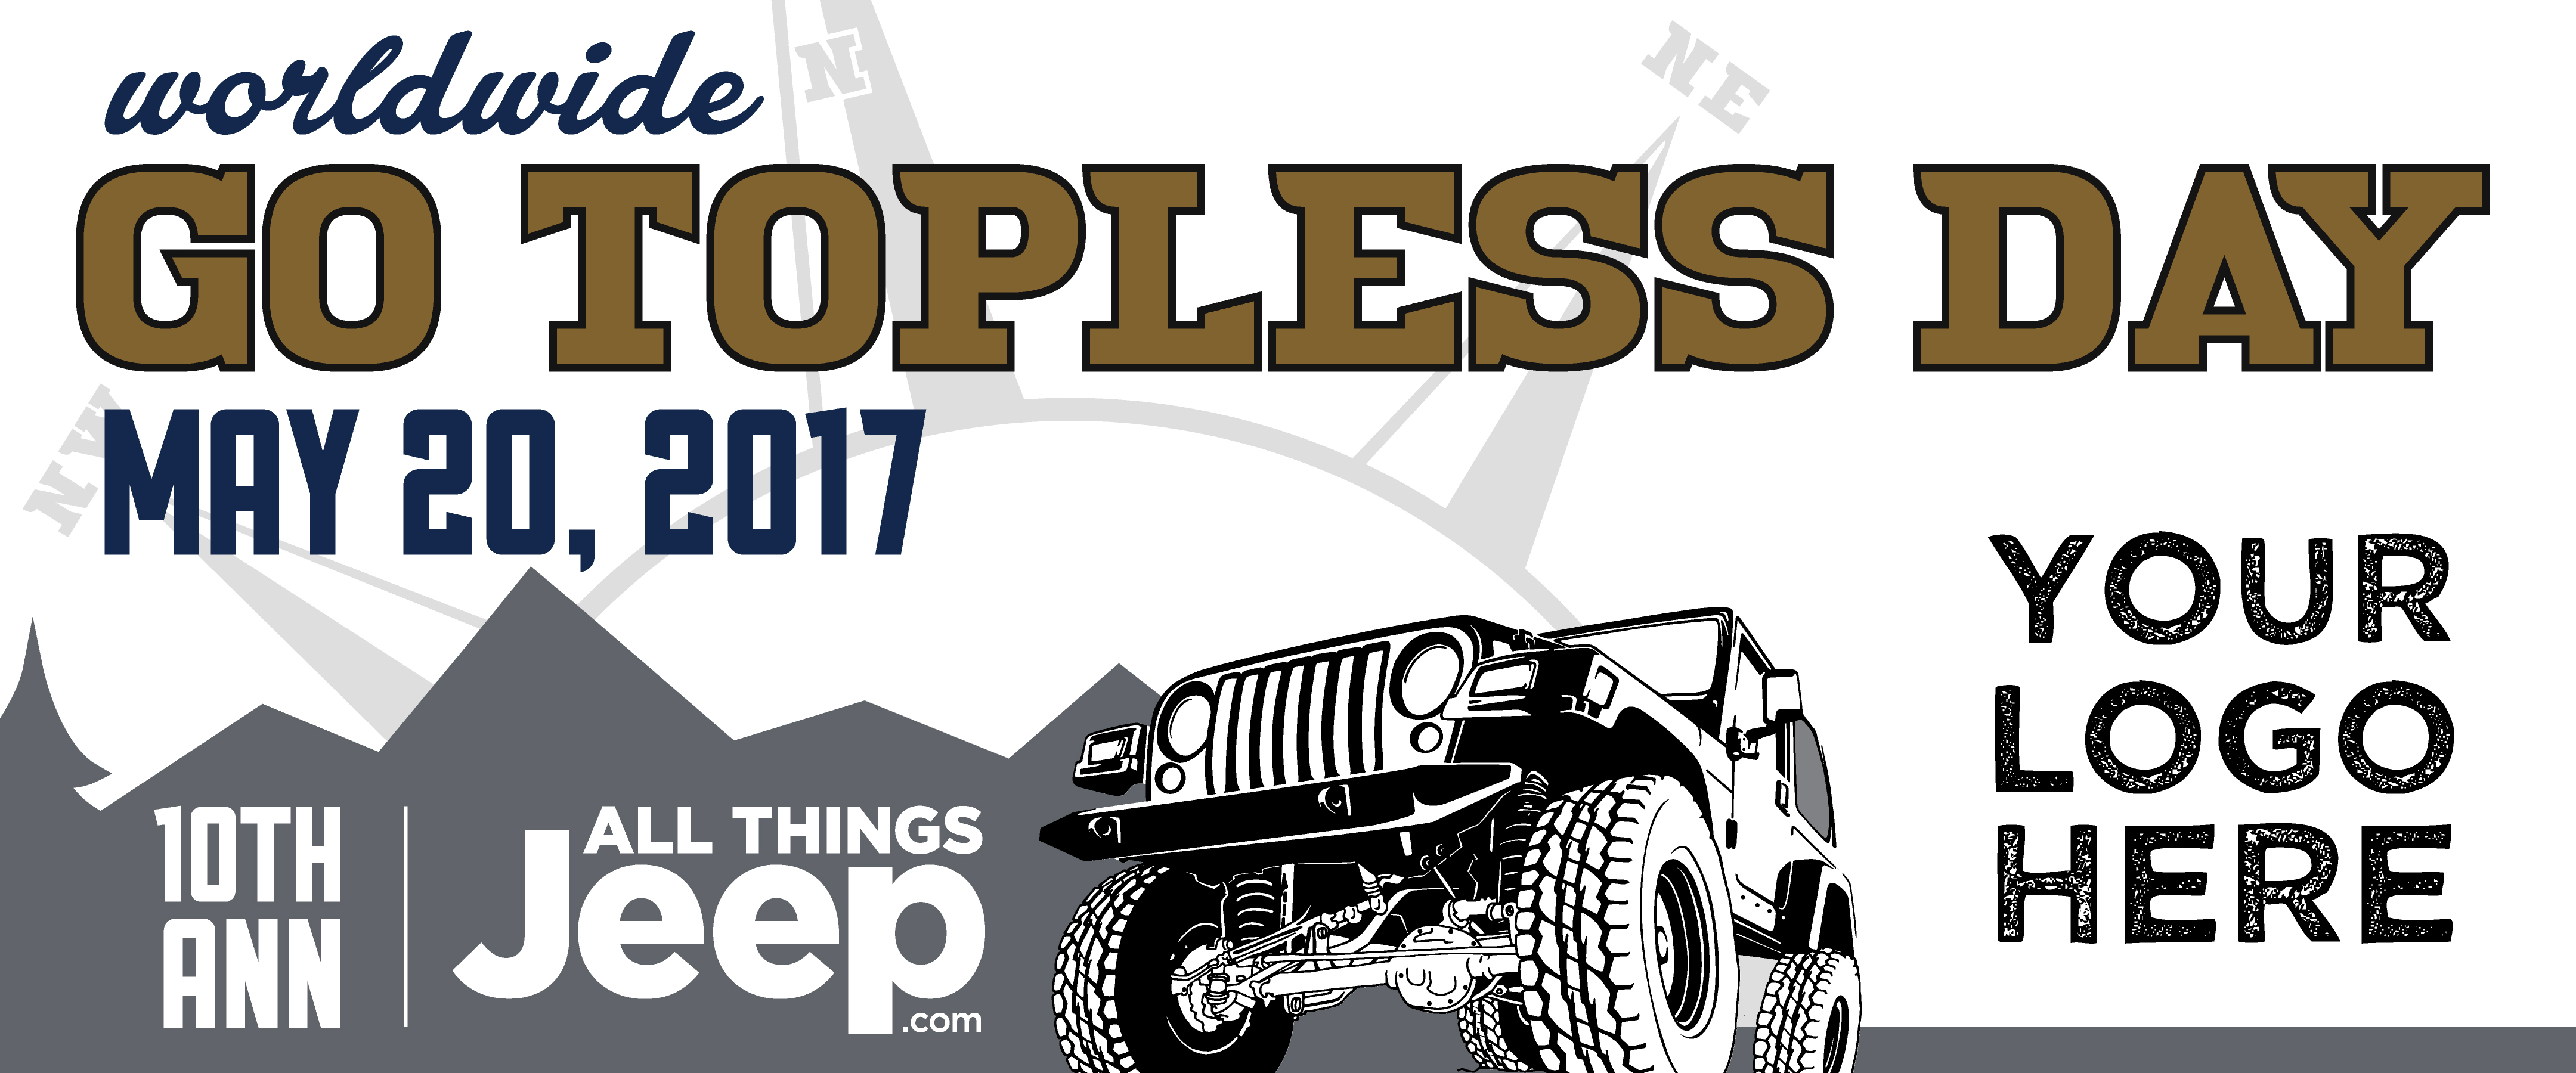 all-things-jeep-club-discounts